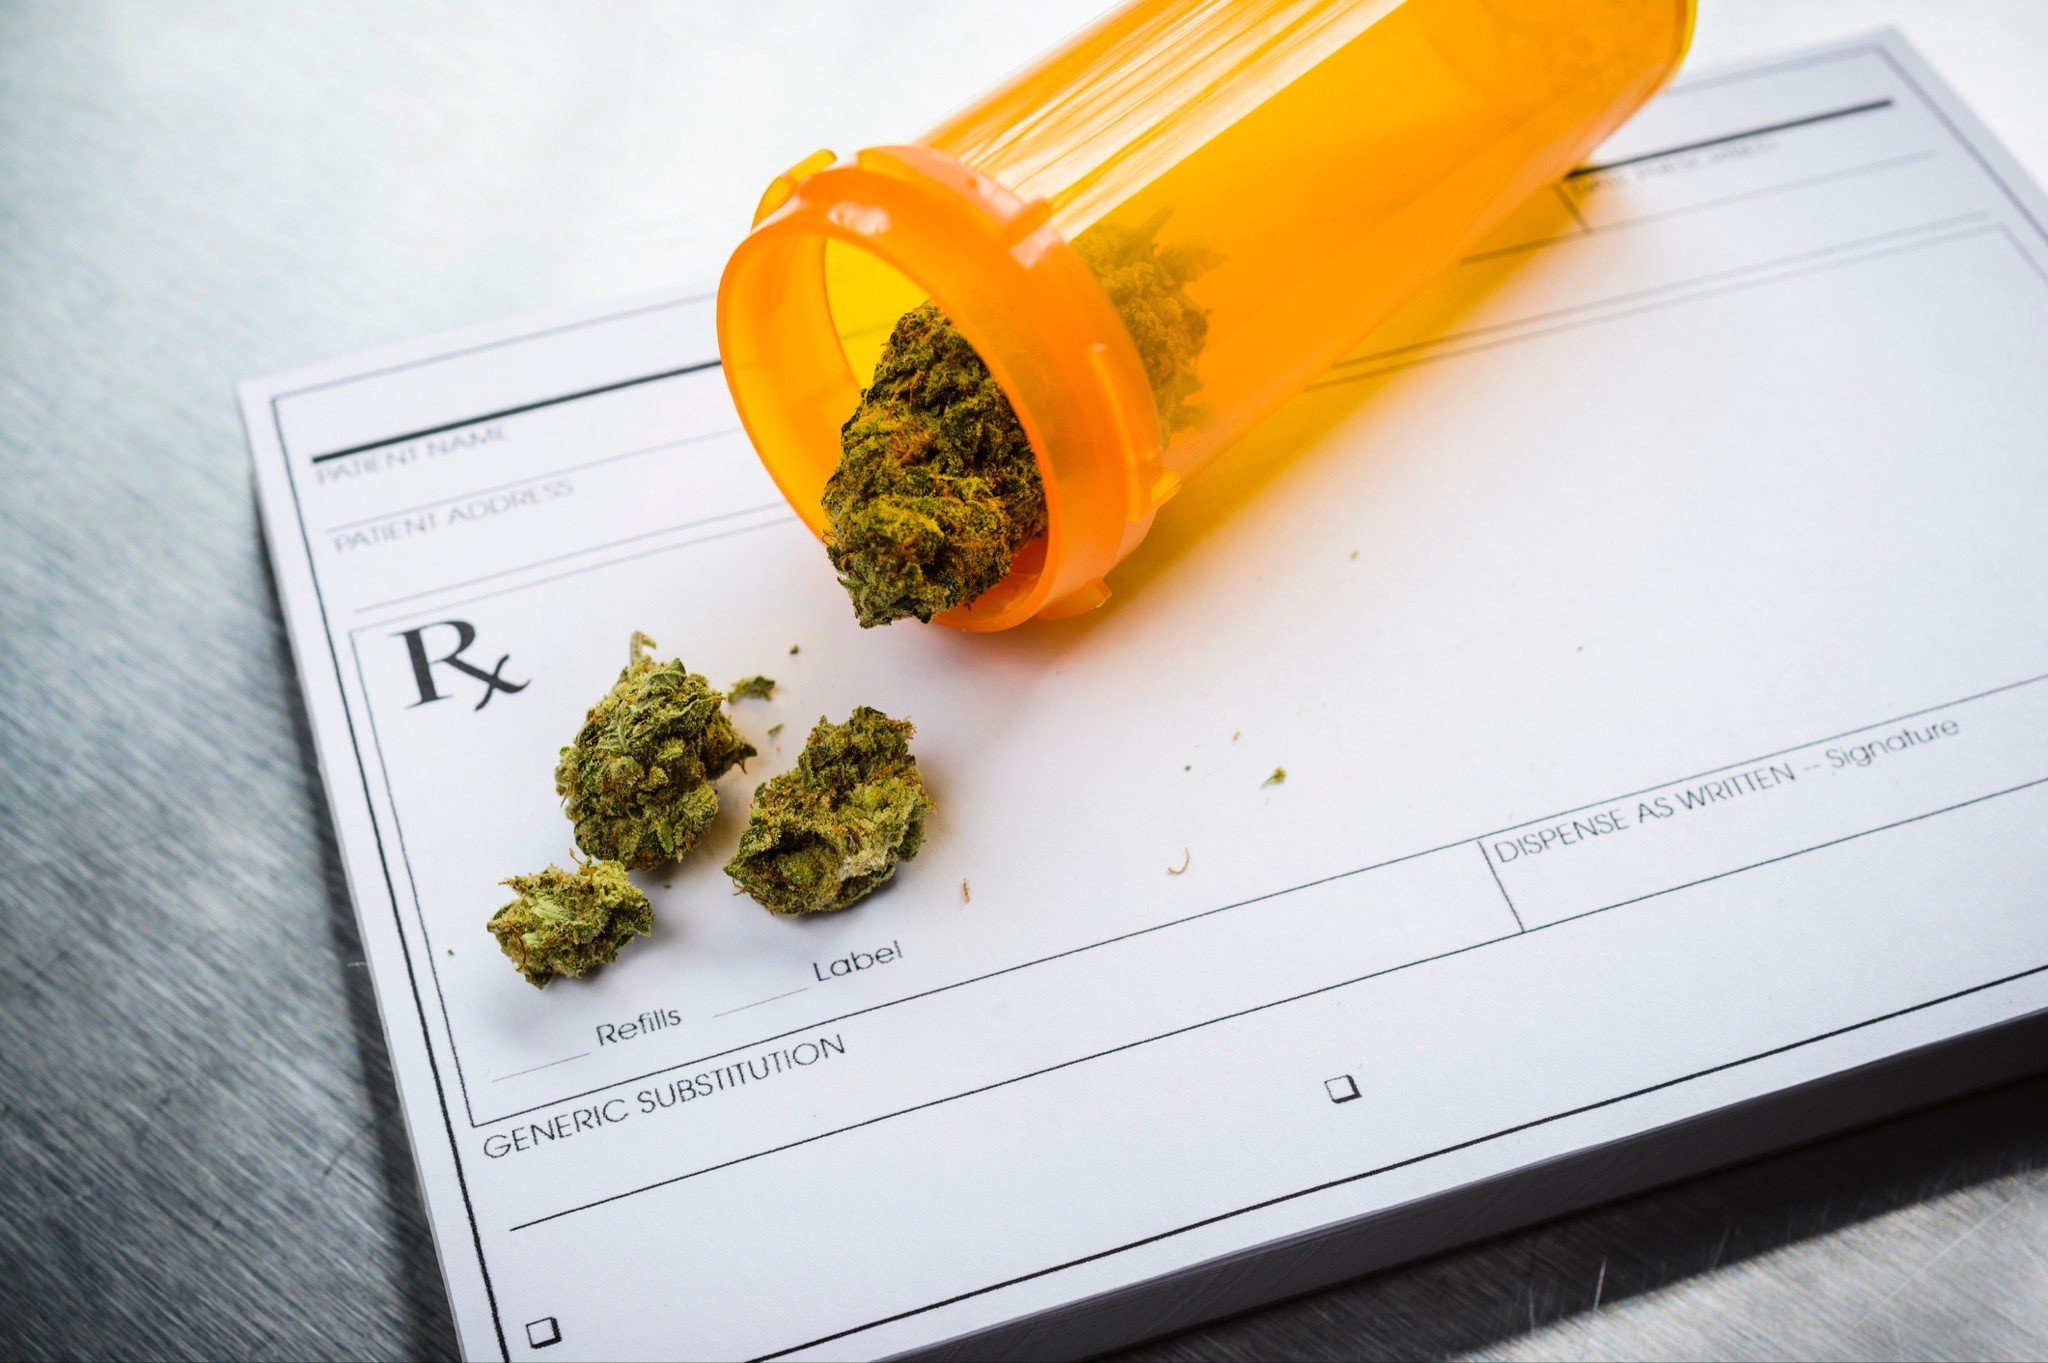 Medical Cannabis in the UK: How Can I Access it?